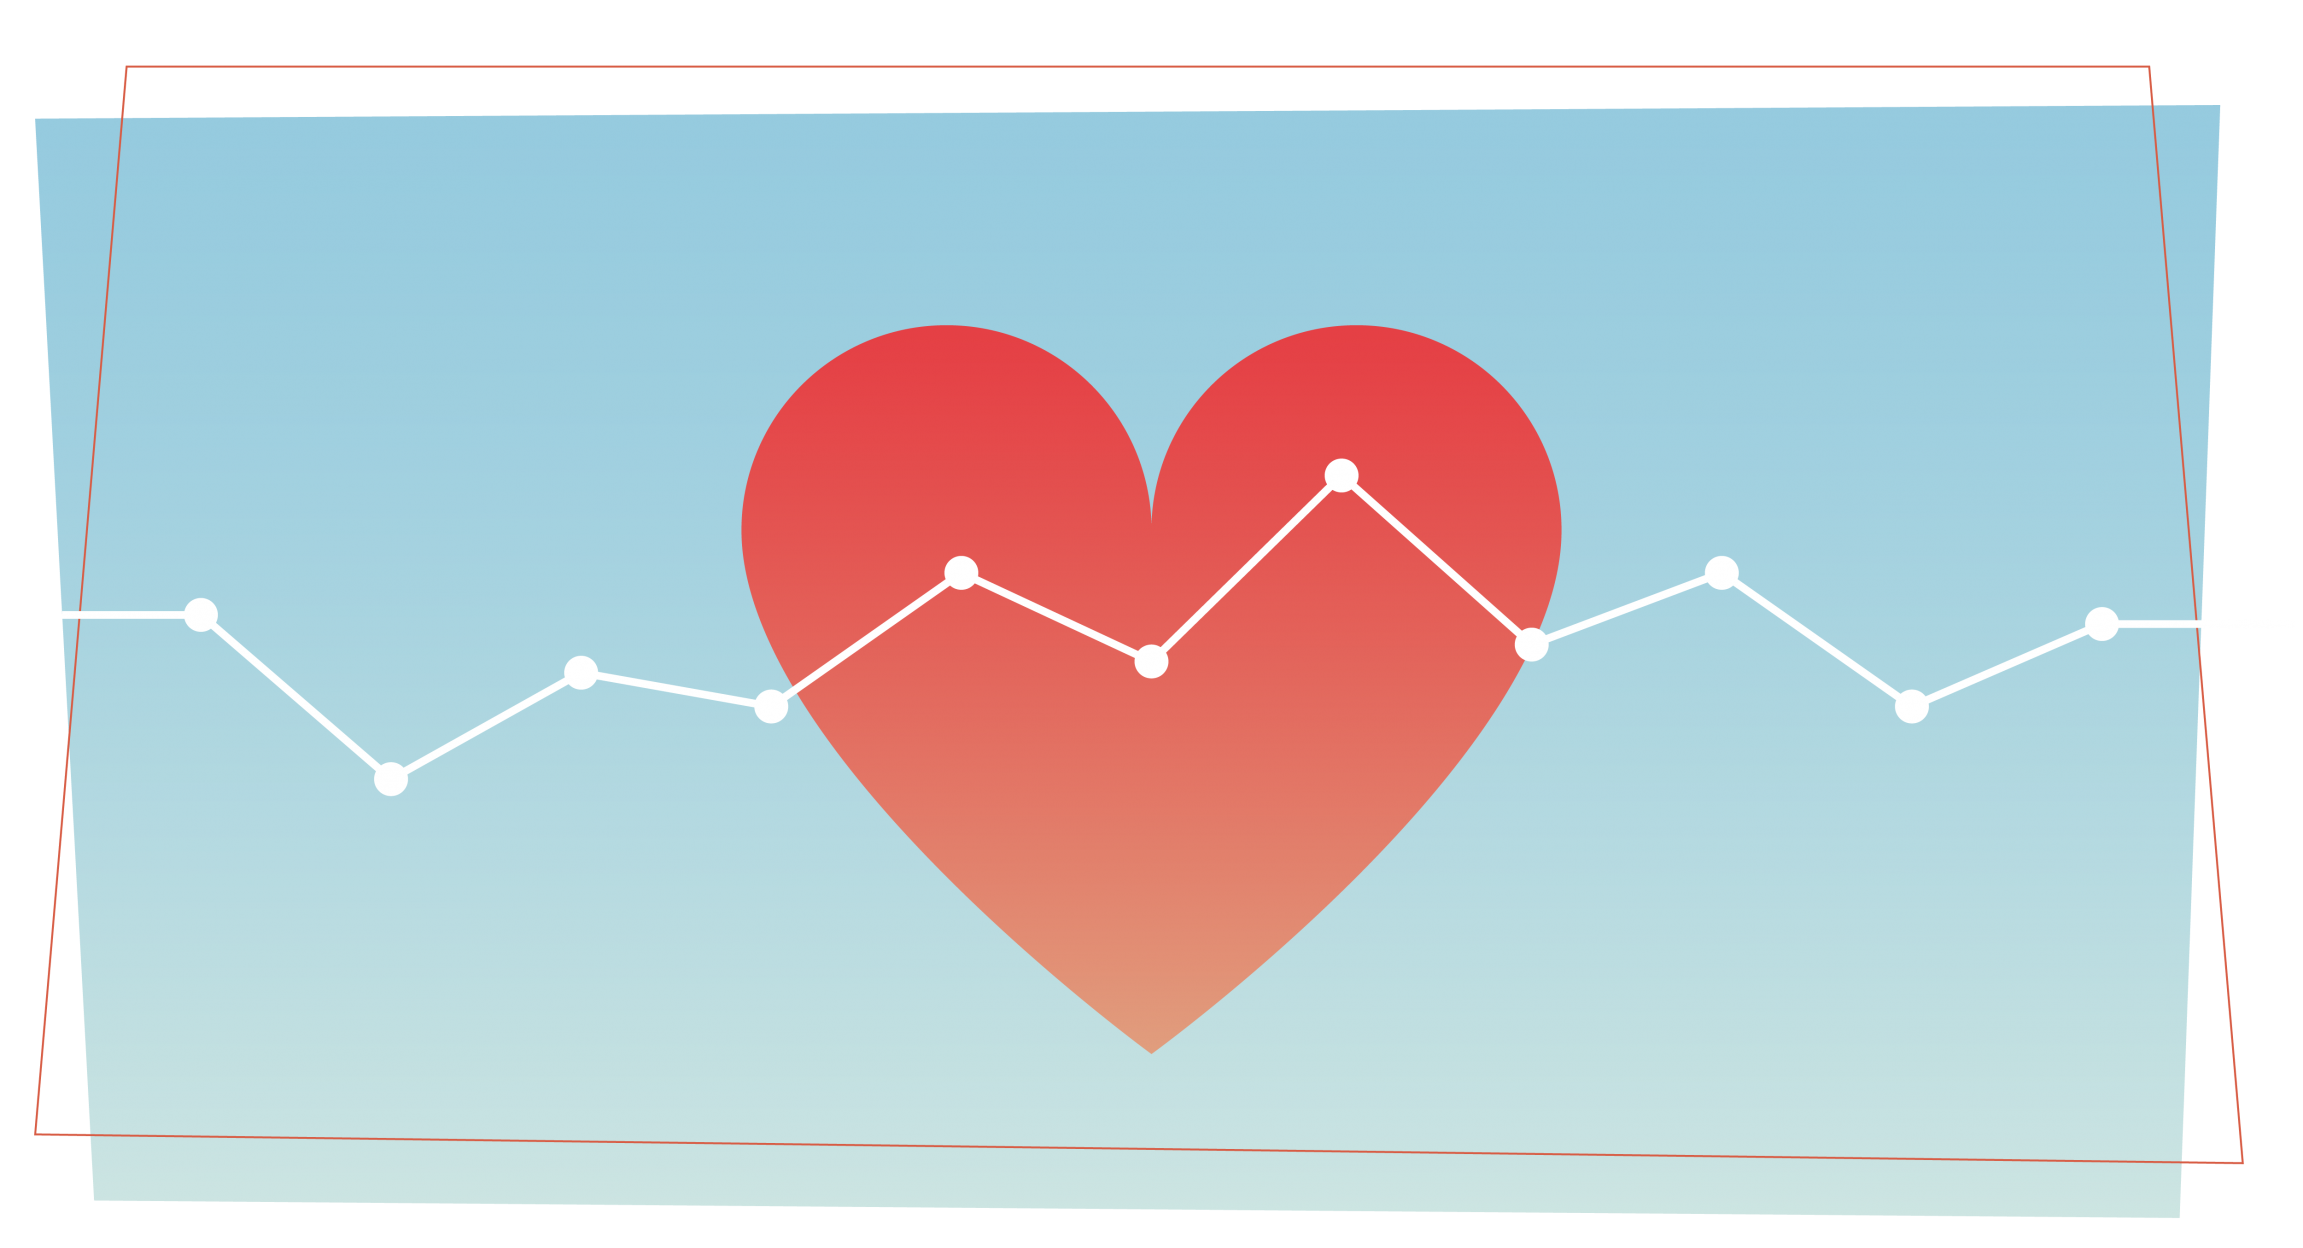 a heart icon with a line plot graph running across it